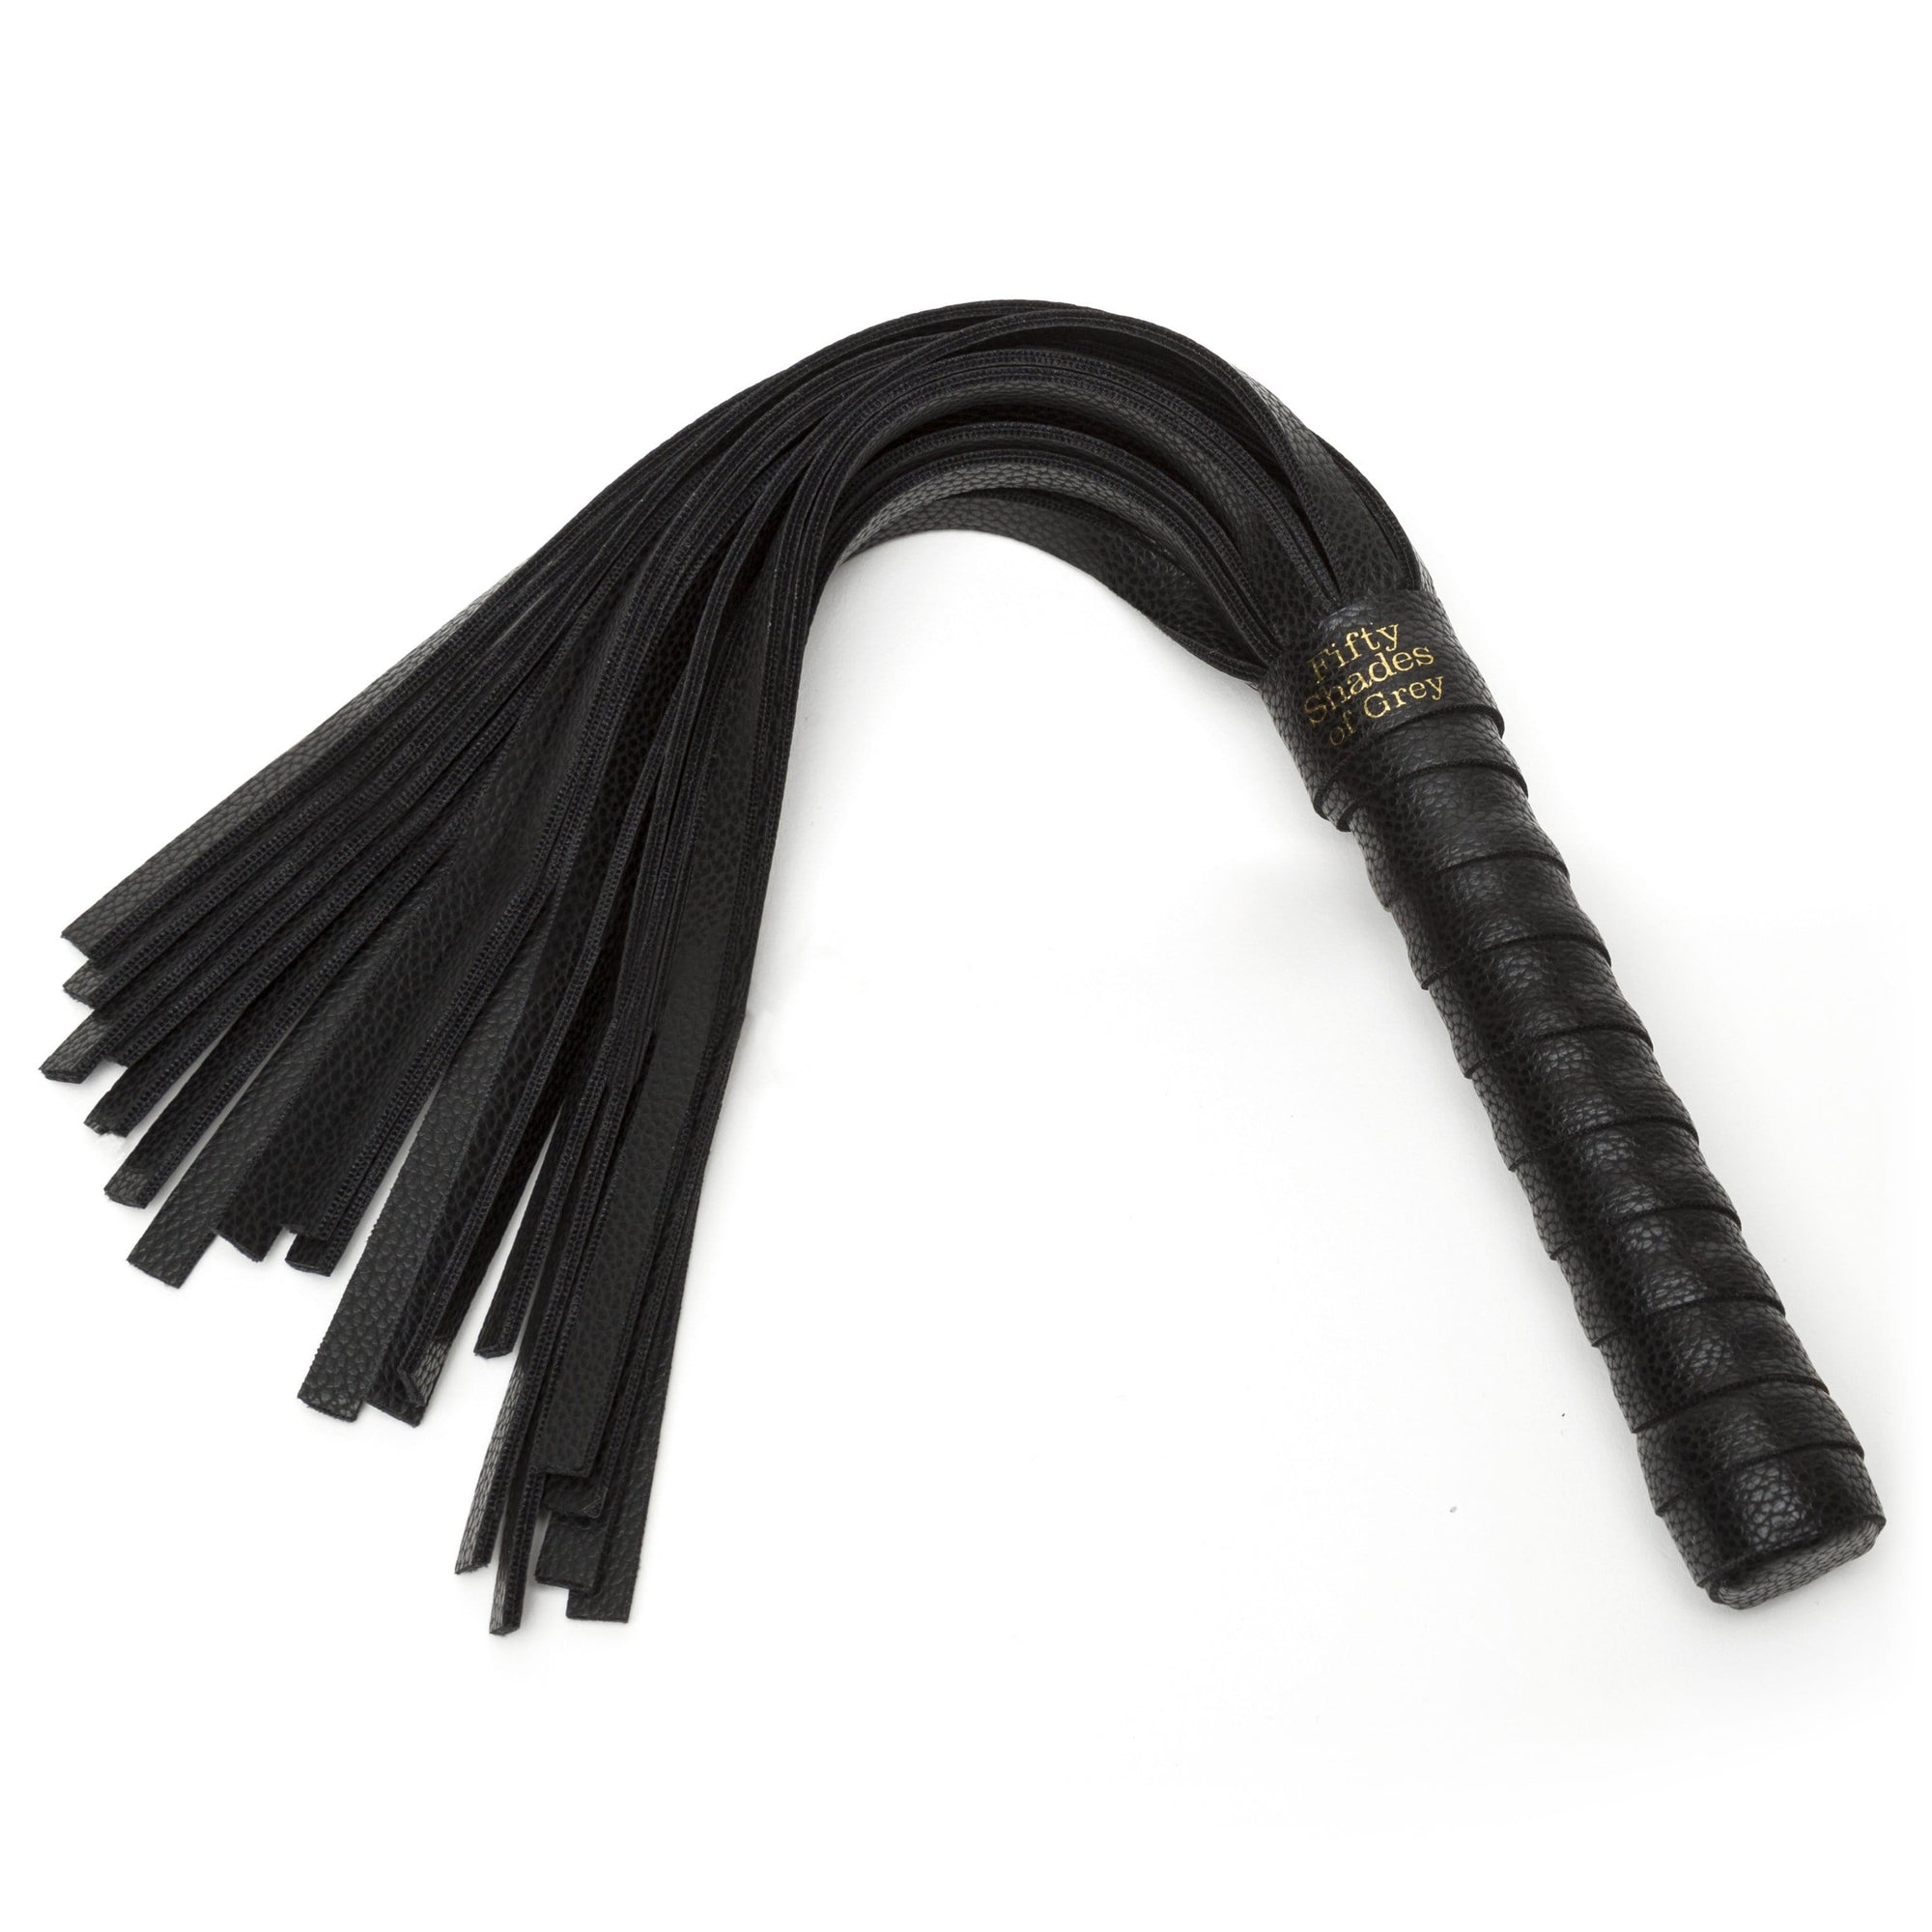 Fifty Shades of Grey - Bound to You Small Flogger (Black) Flogger 319731260 CherryAffairs